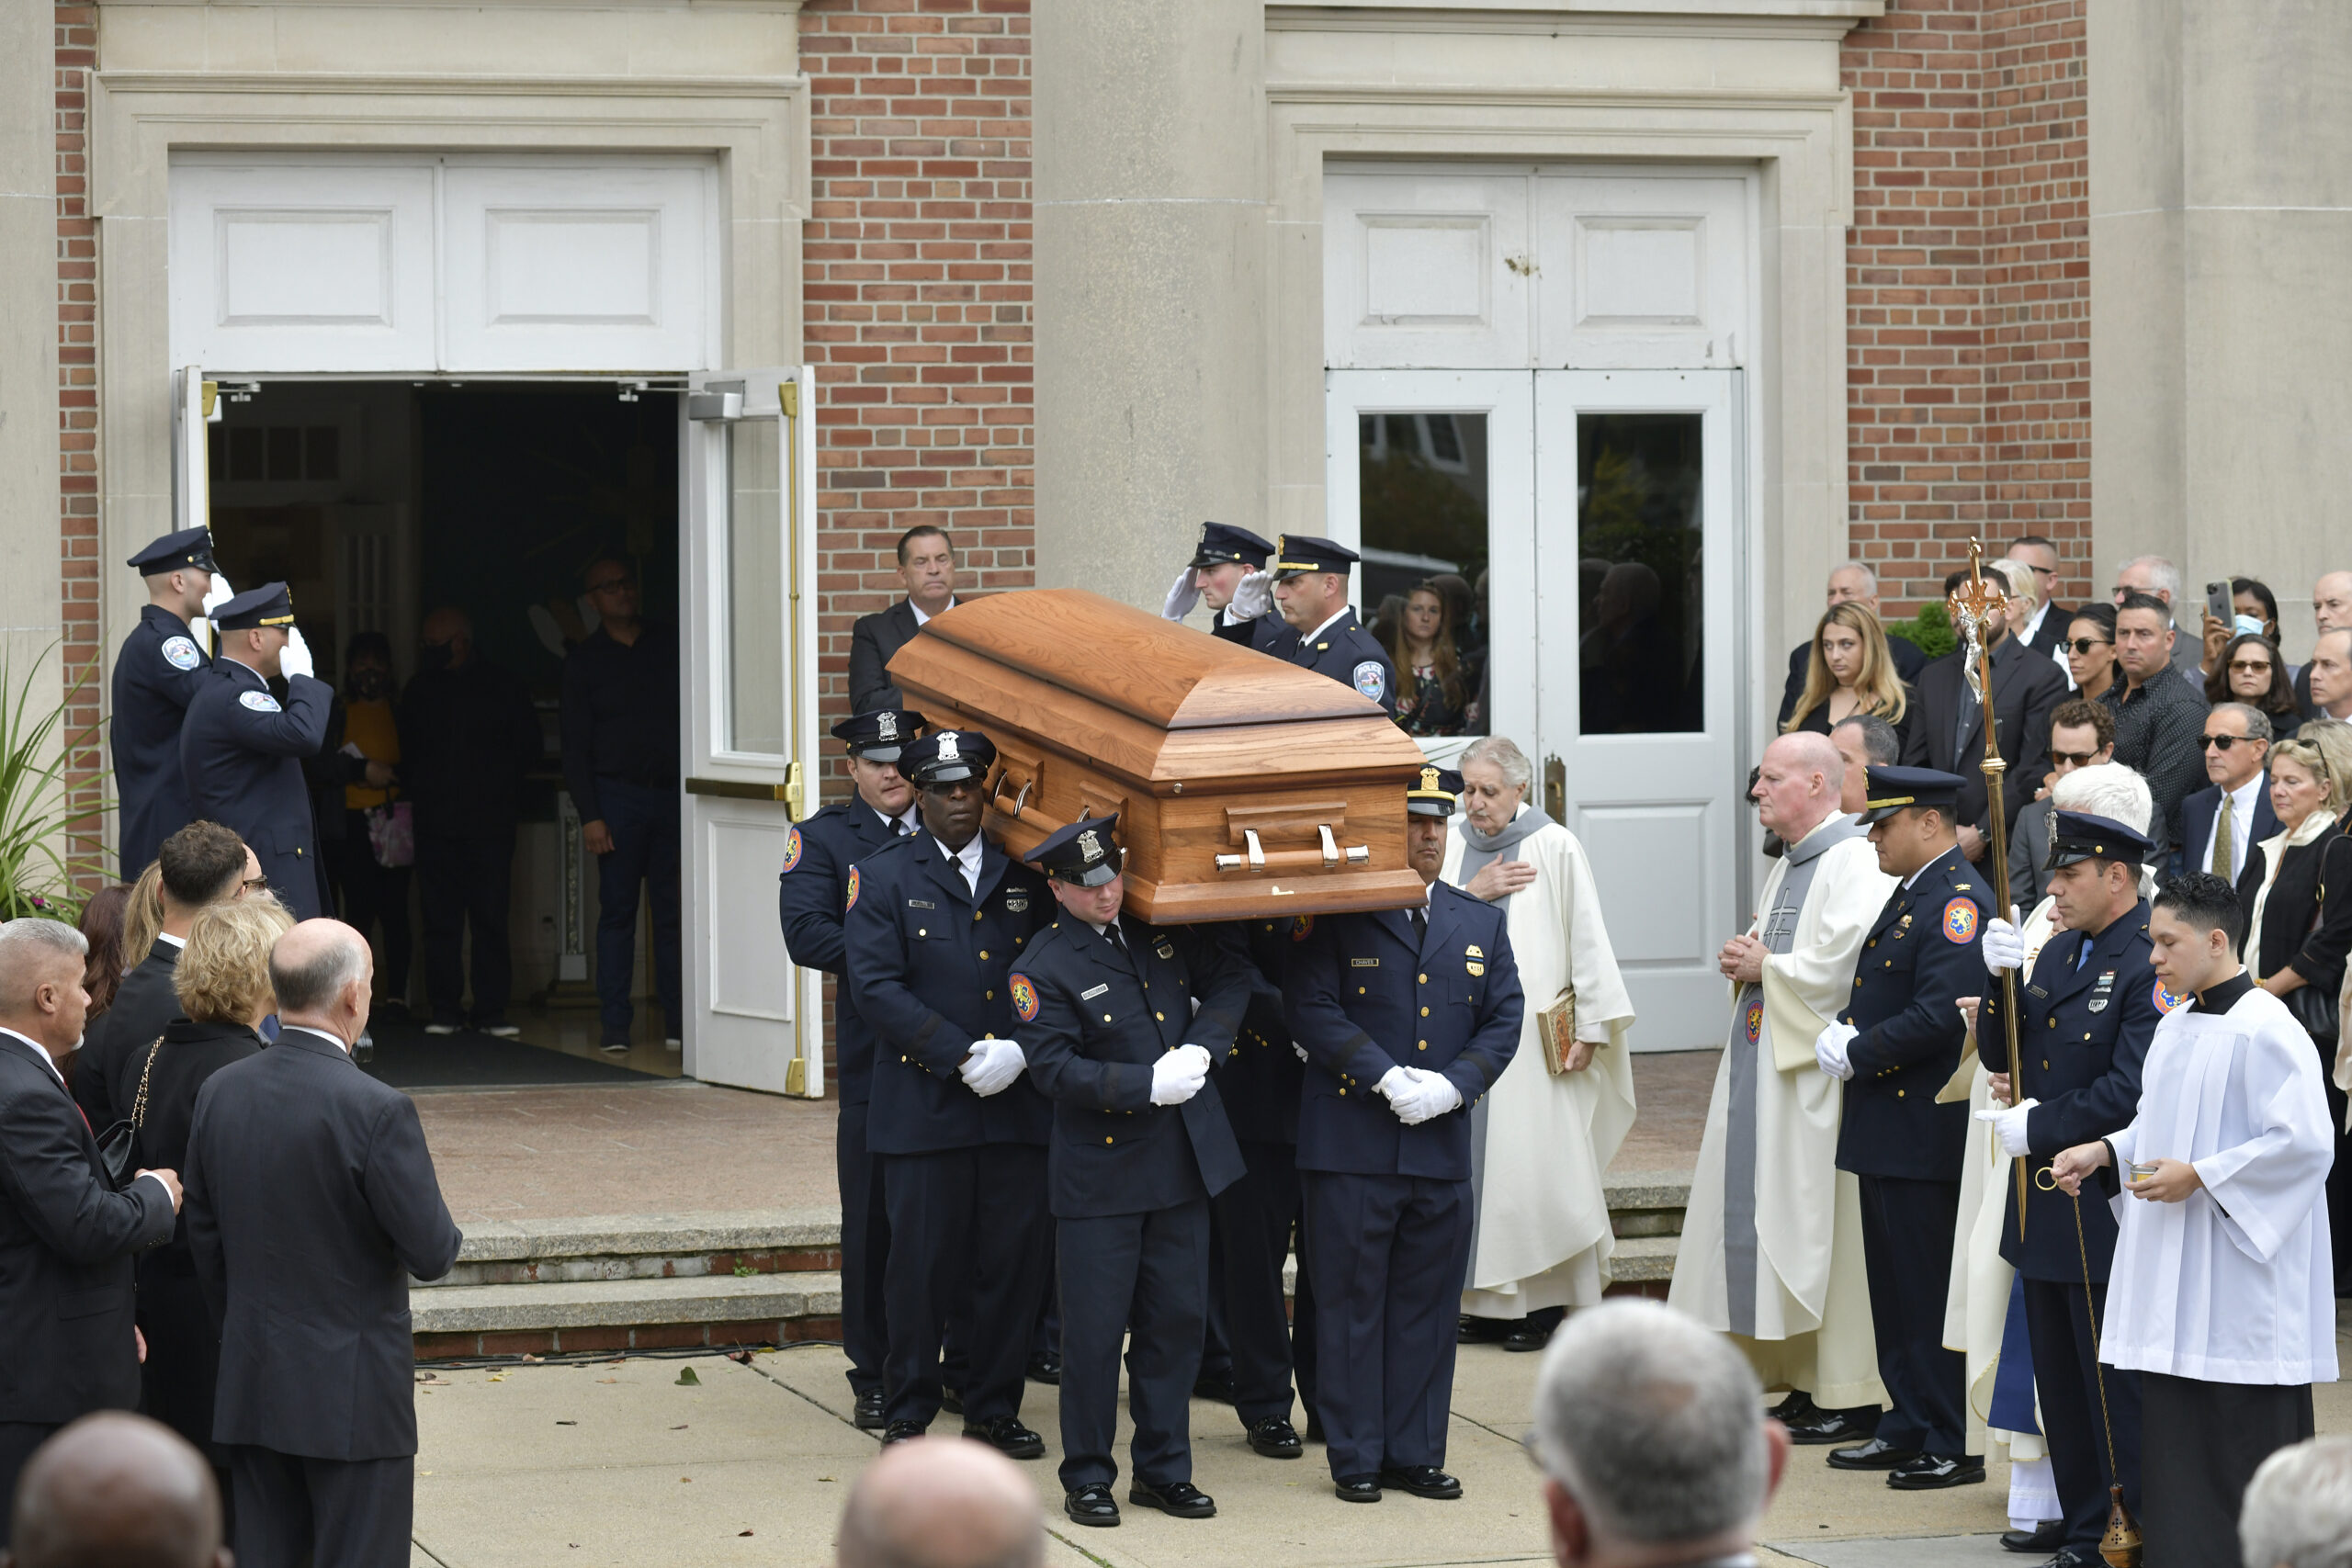 Pallbearers carry the casket of Southampton Police Chief Steven Skrynecki from St. Martin of Tours Church in Amityville on October 13.